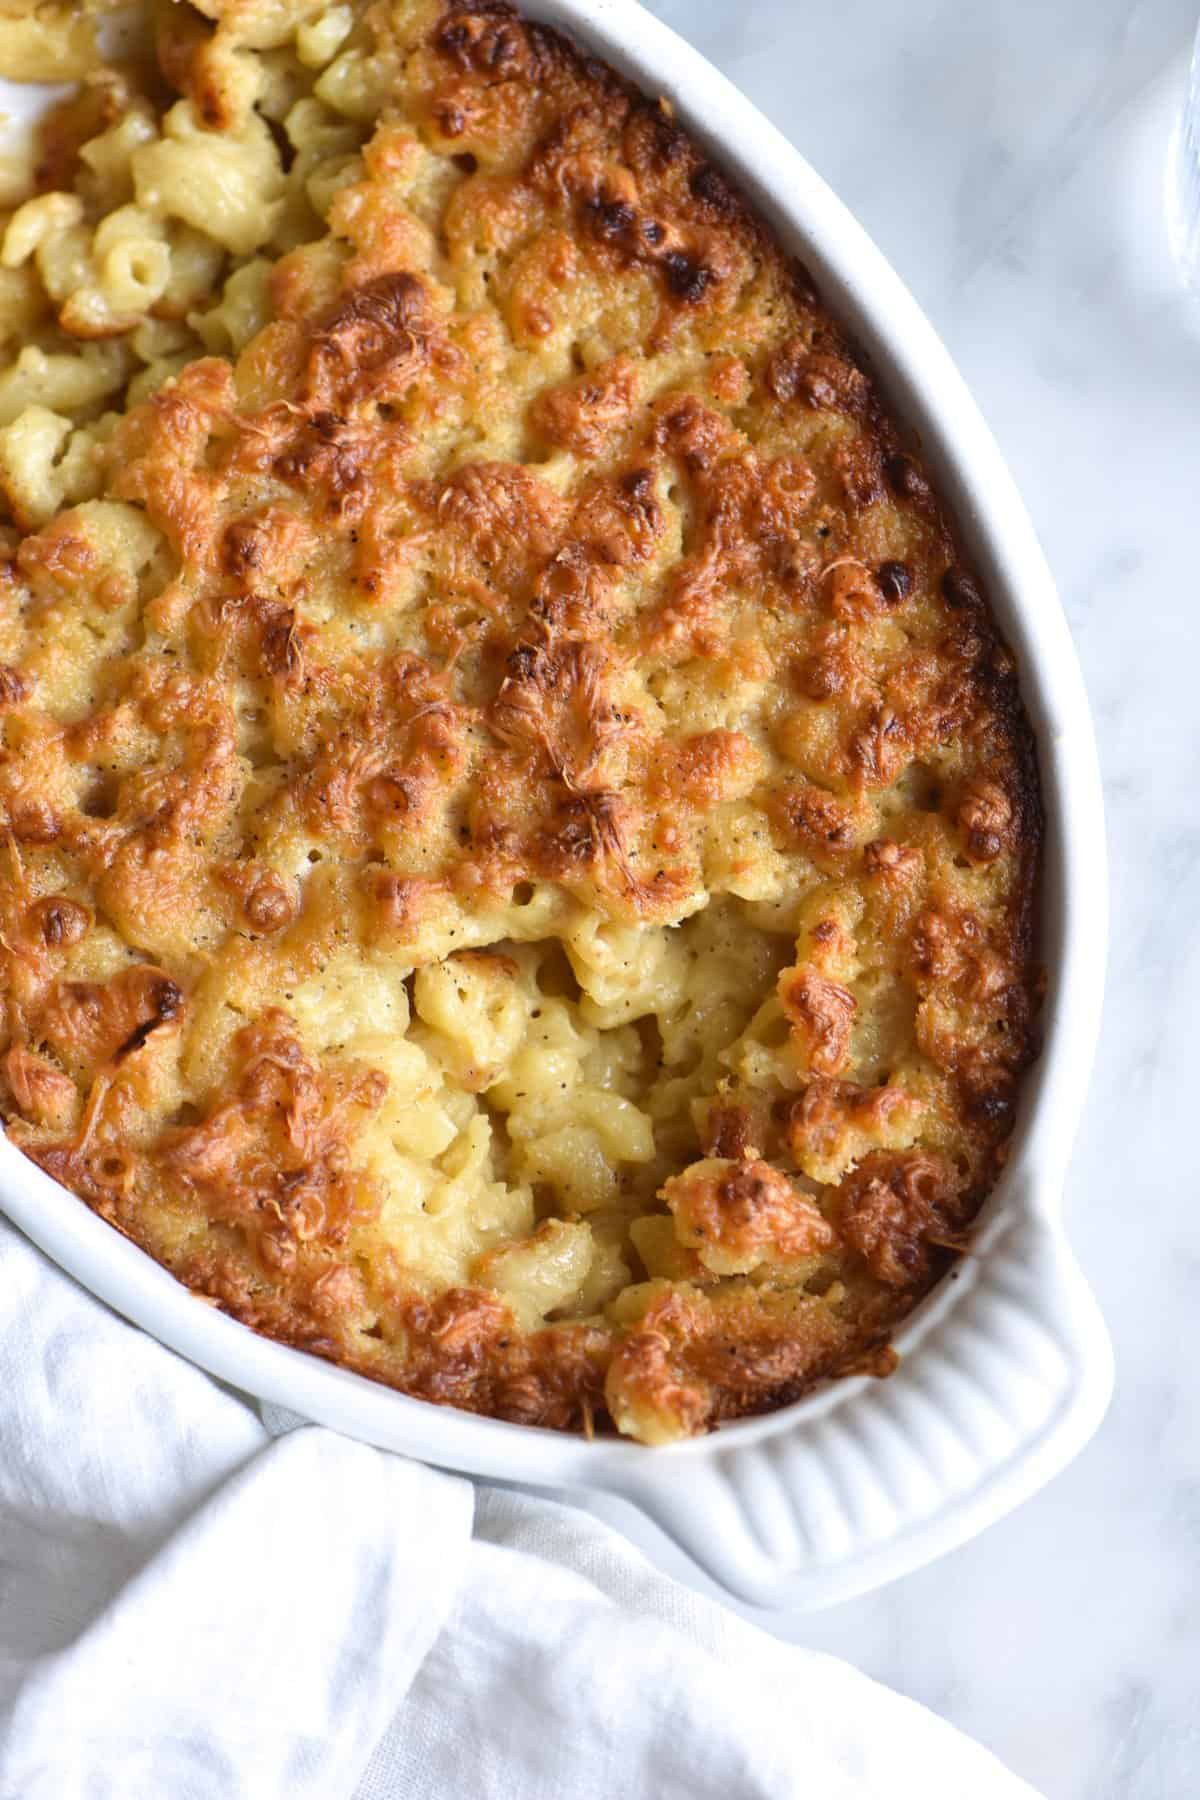 A close up of vegan gluten-free mac and cheese bake against a white marble backdrop